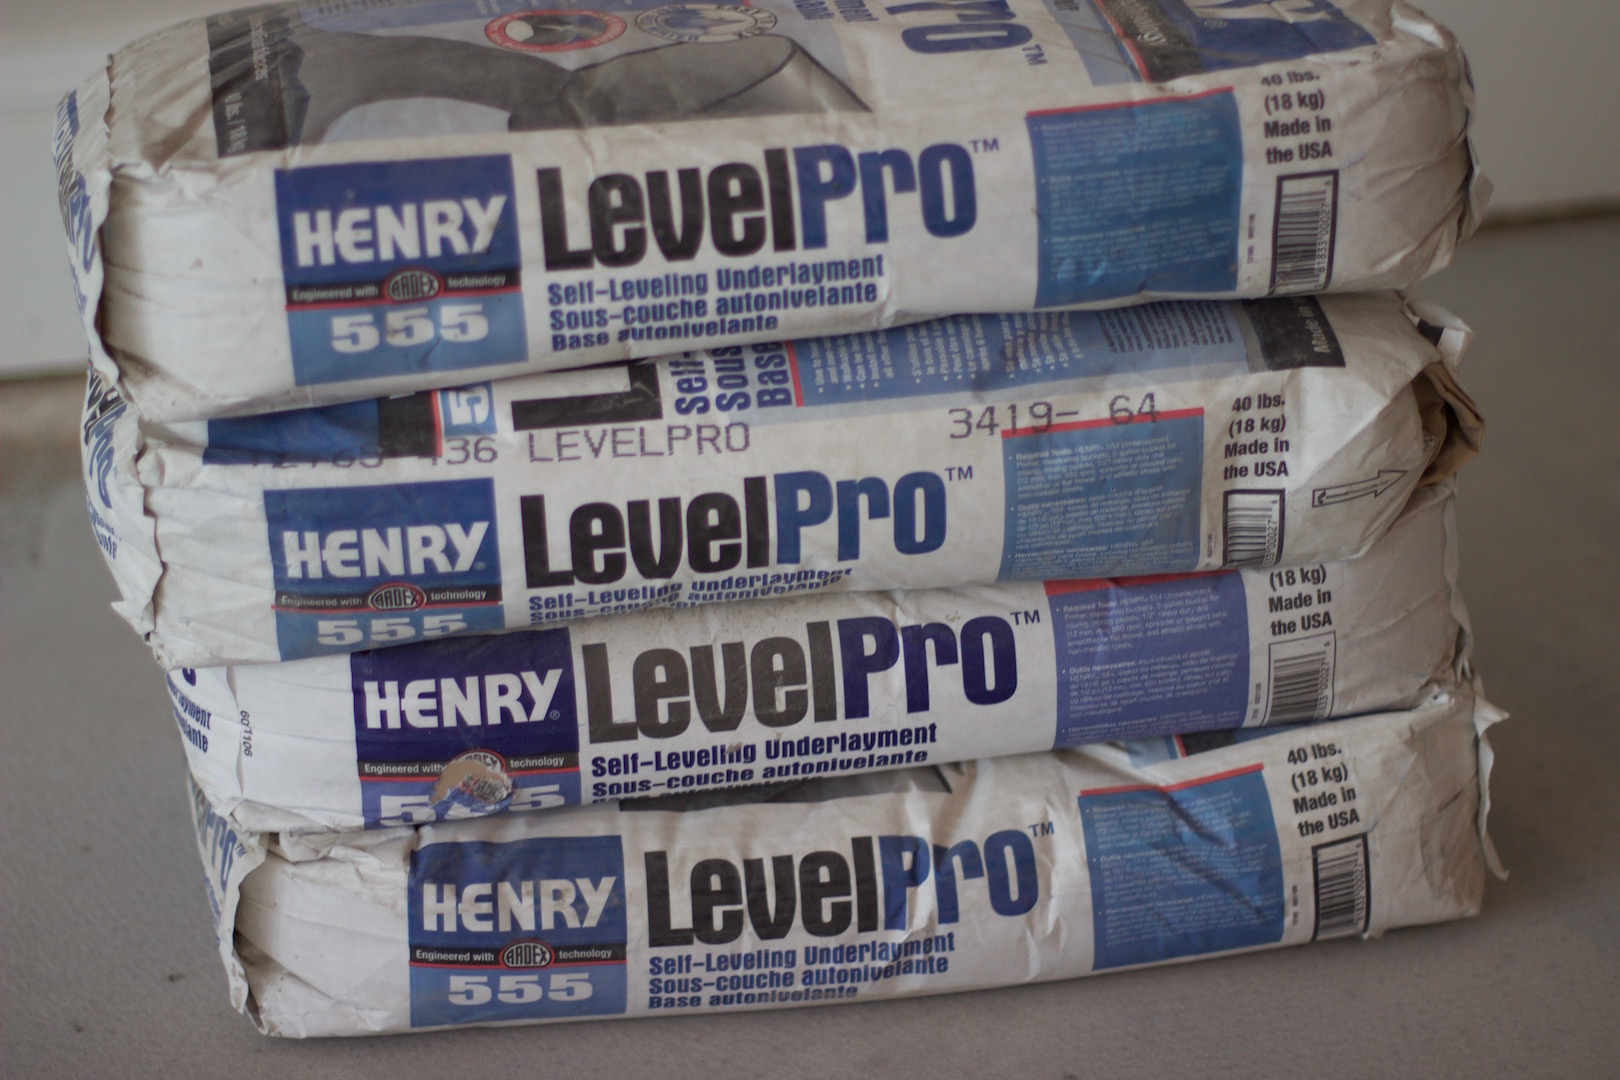 Where can you find inexpensive self-leveling compound for a concrete floor?